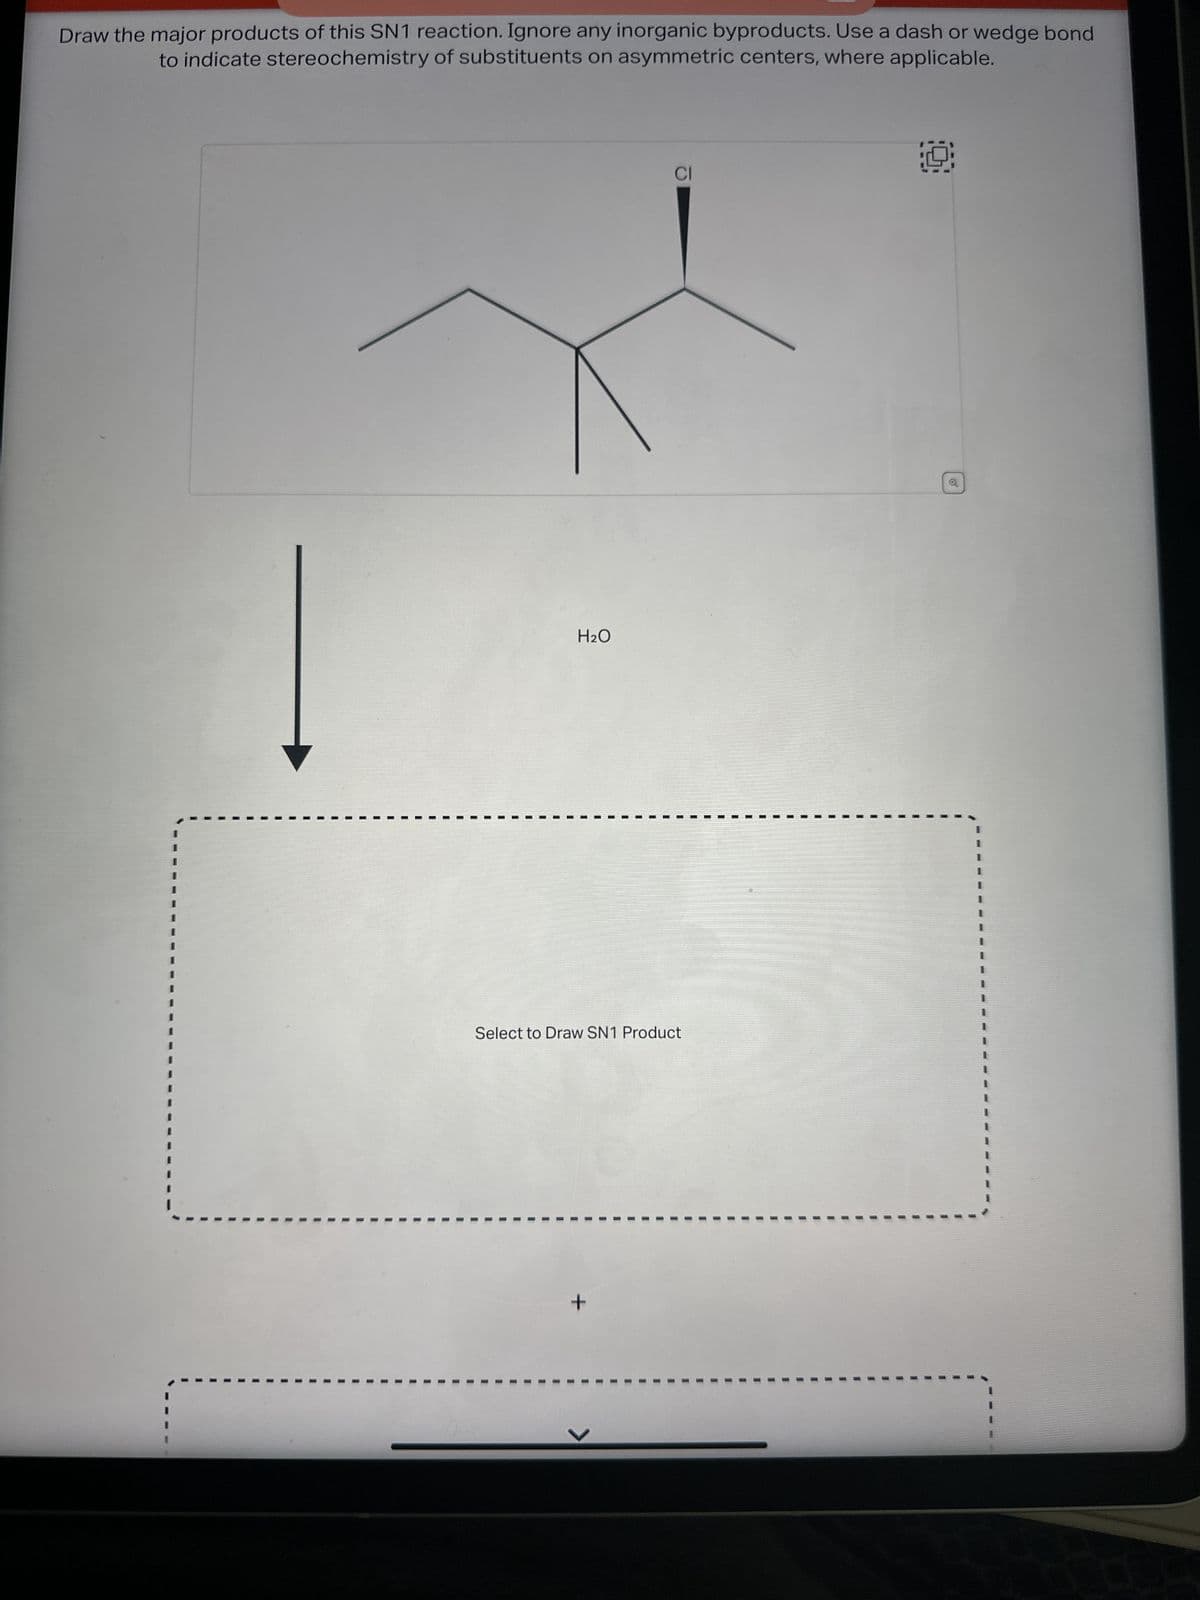 Draw the major products of this SN1 reaction. Ignore any inorganic byproducts. Use a dash or wedge bond
to indicate stereochemistry of substituents on asymmetric centers, where applicable.
H₂O
CI
Select to Draw SN1 Product
+
19
o